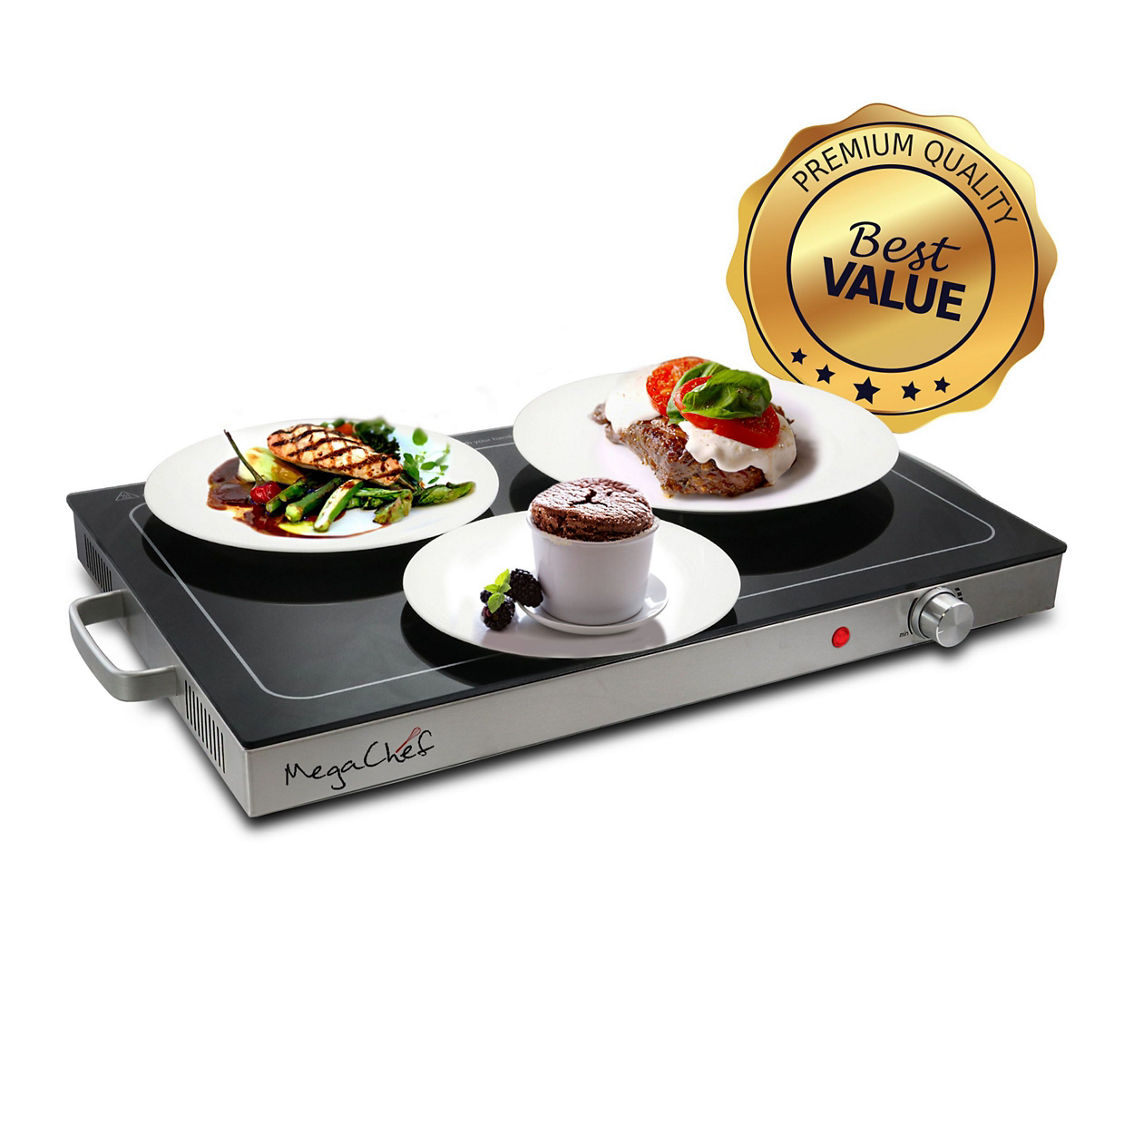 MegaChef Electric Warming Tray, Food Warmer, Hot Plate, With Adjustable Temperat - Image 3 of 5